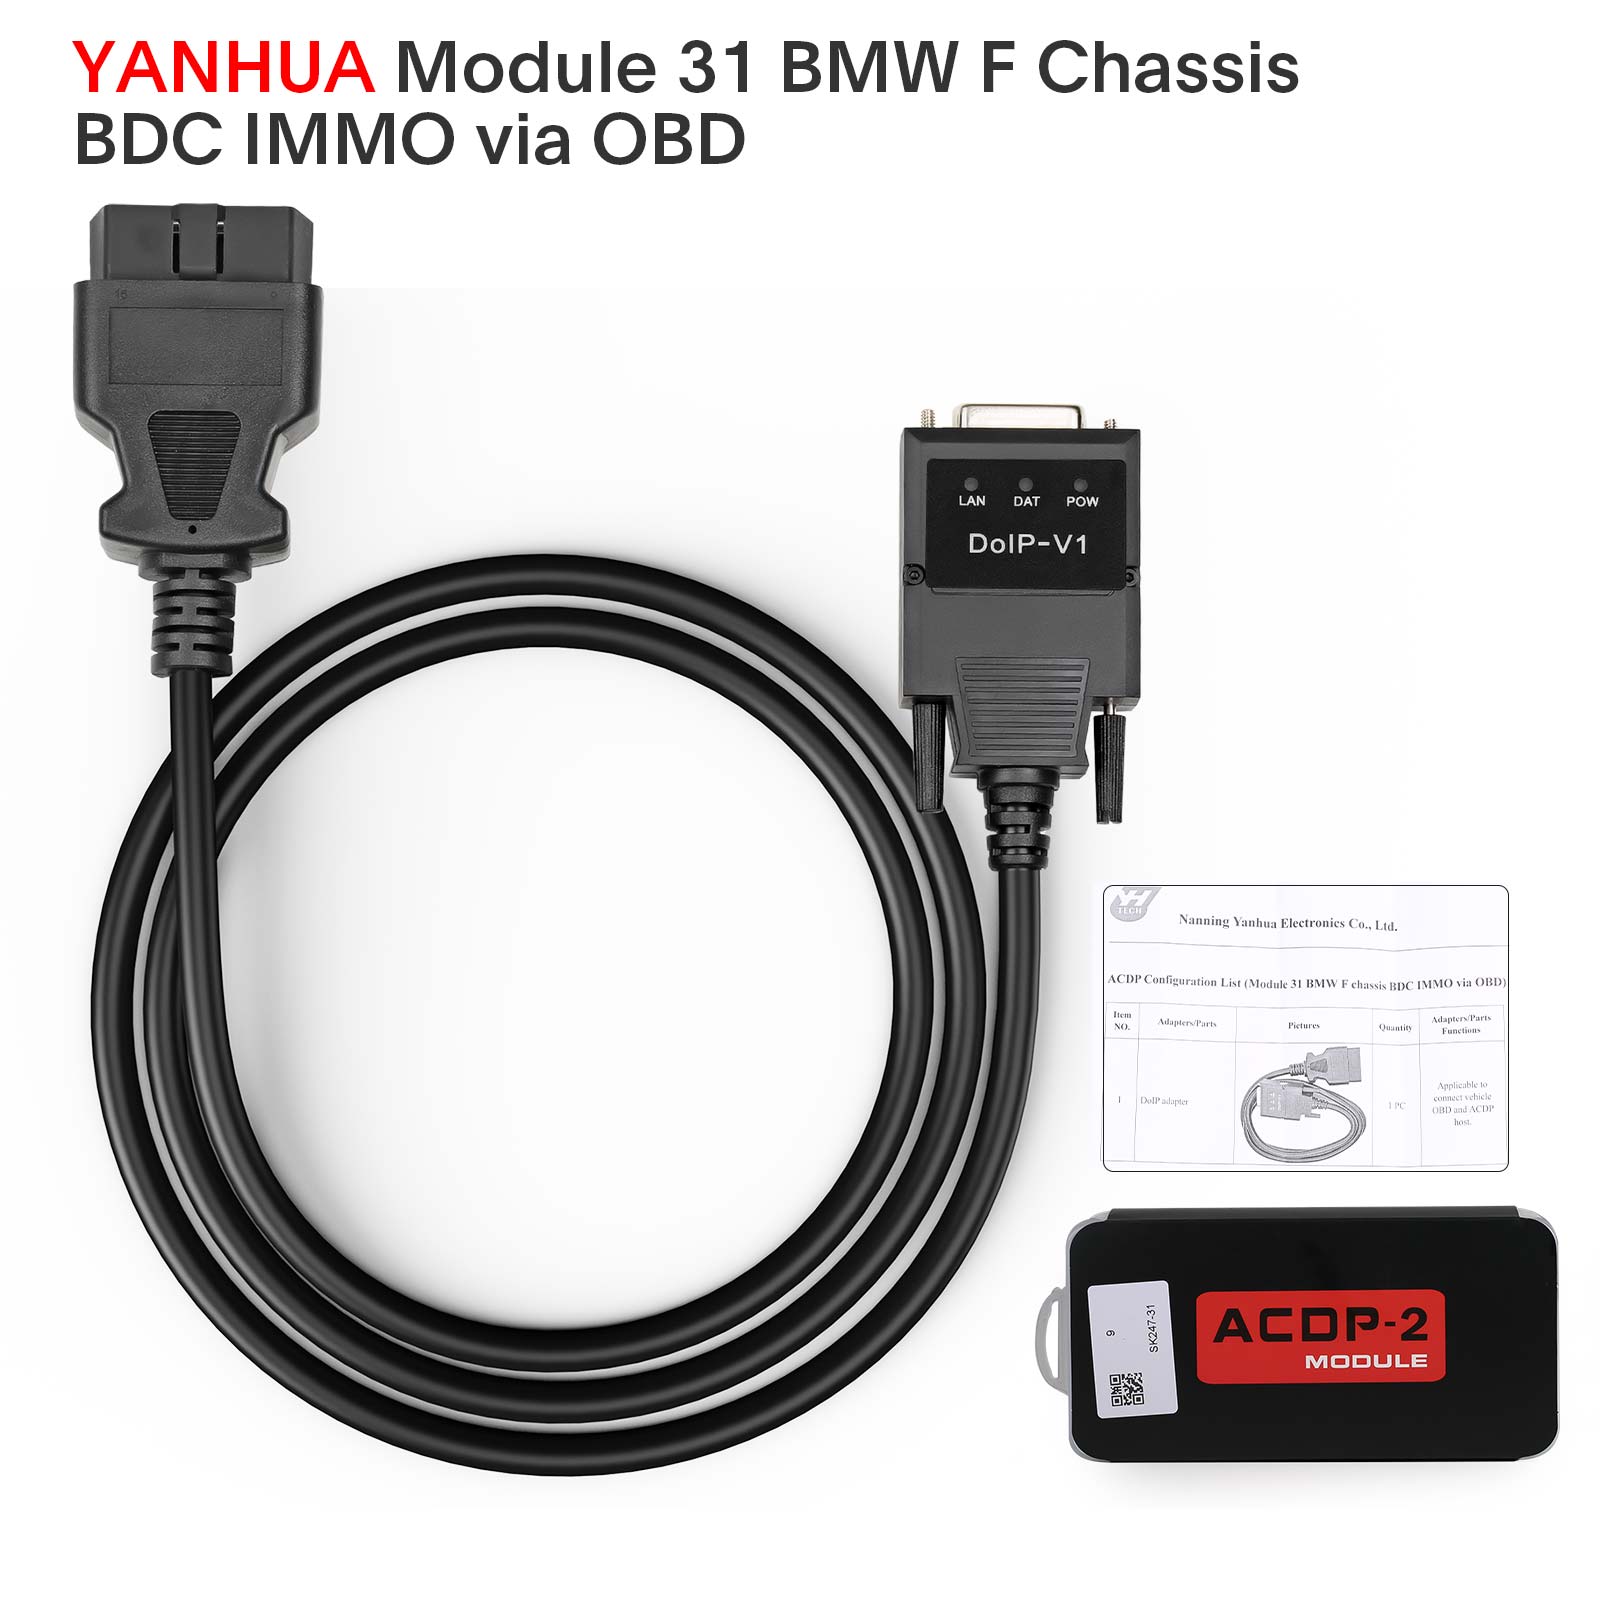 Yanhua ACDP Module31 for BMW F chasis BDC Key Programming and